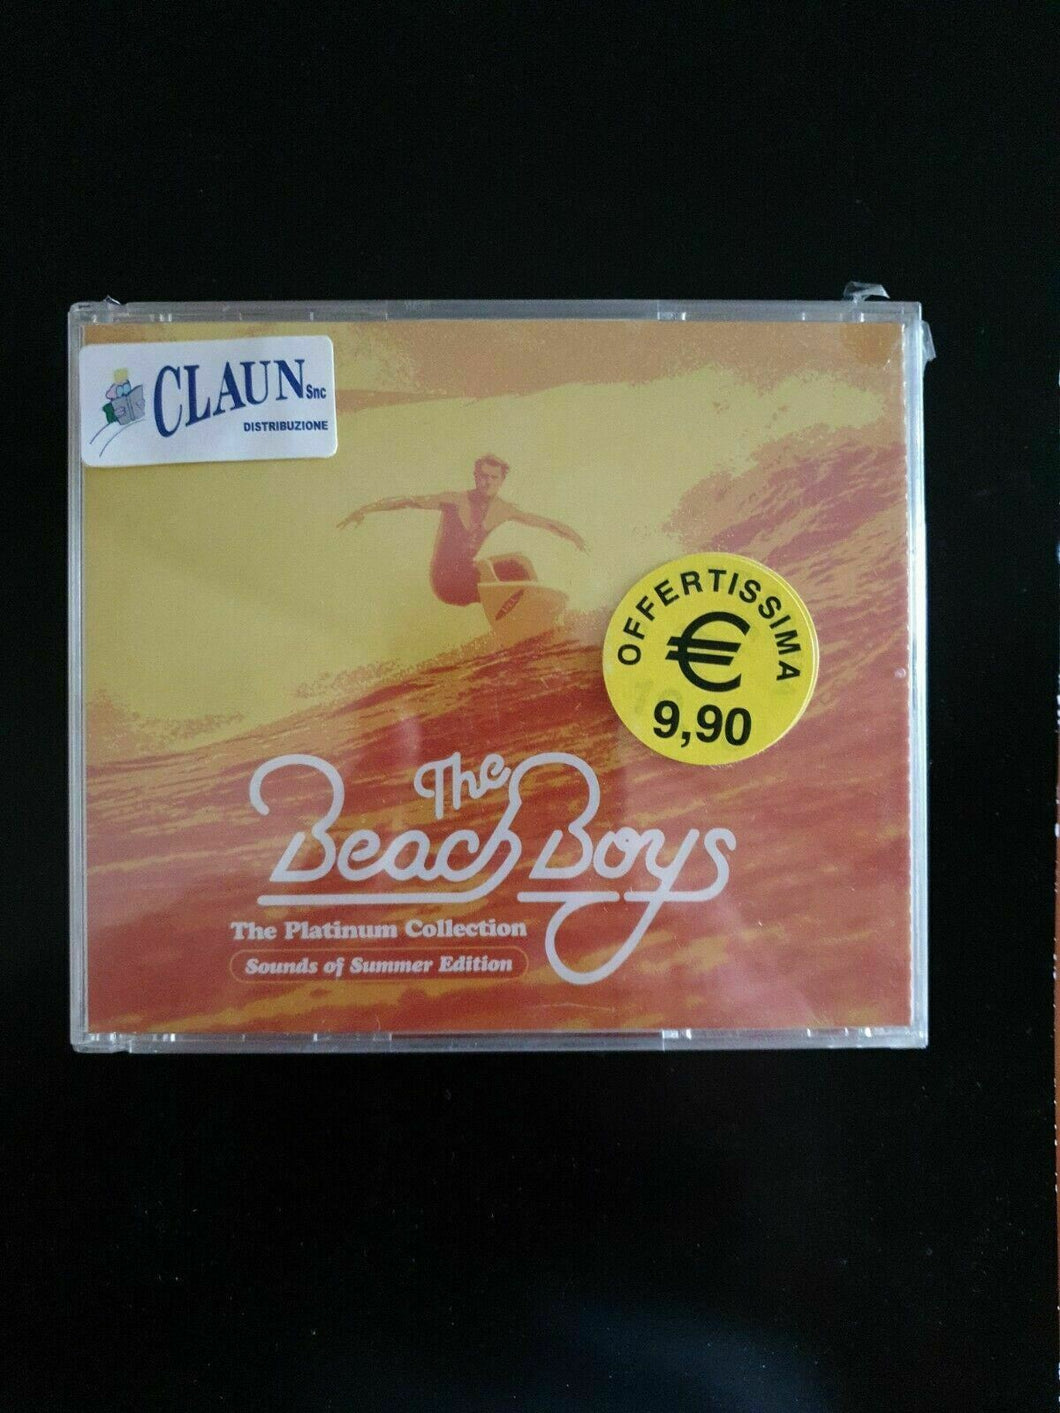 The Beach Boys - The Platinum Collection Sounds of Summer Edition 3 CD NUOVO